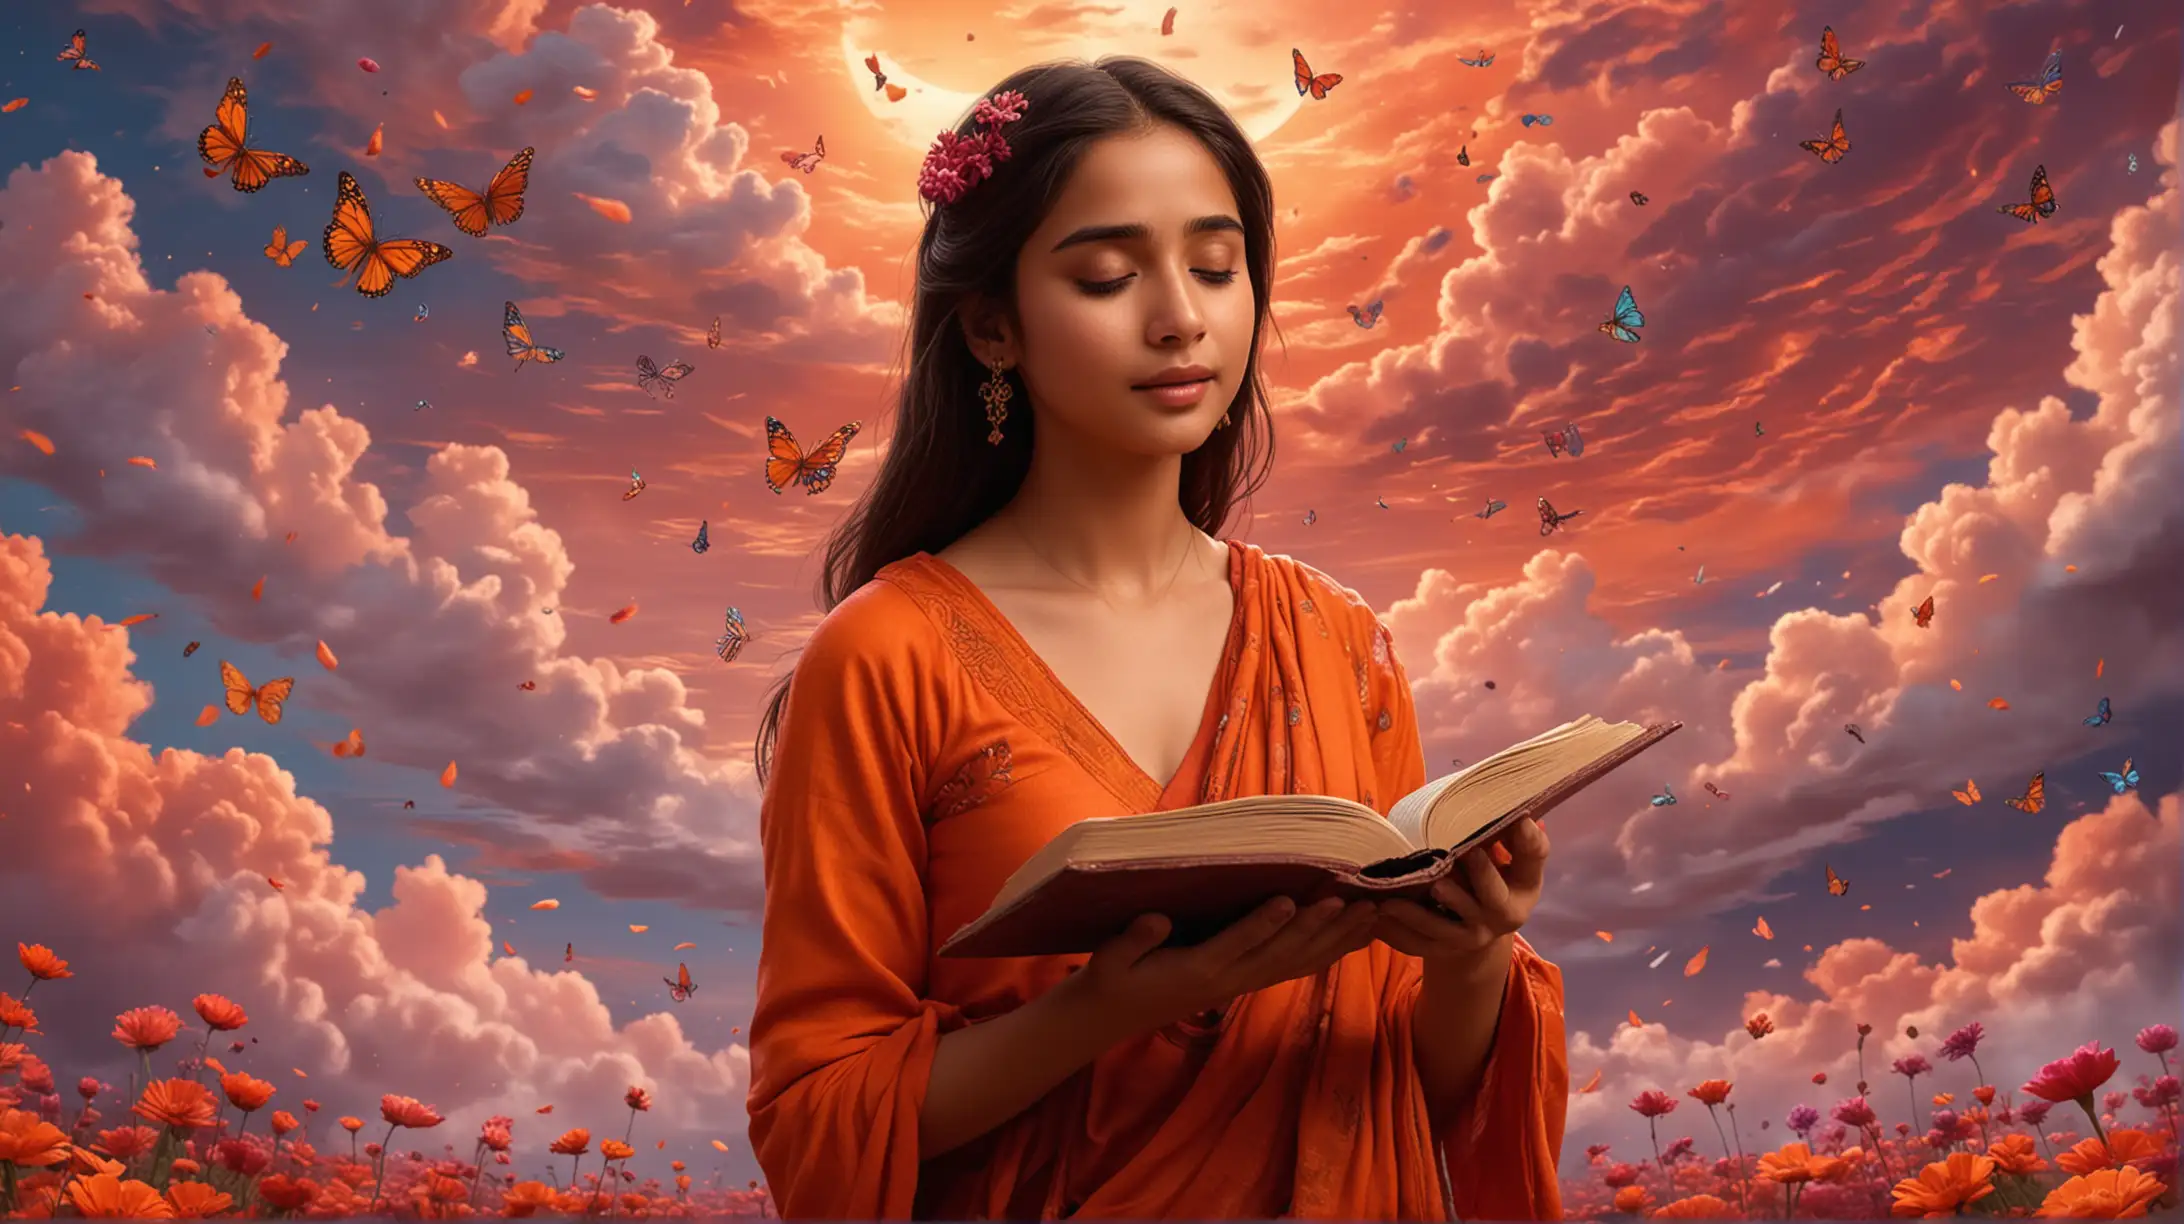 cartoon, Naomi Scott as indian girl reads Mantras of the Rig Veda only 5 fingers, orange dress, Tibet, fog, clouds, Red Sky, eyes closed, surrounded by gorgeous colorful flowers, butterflies